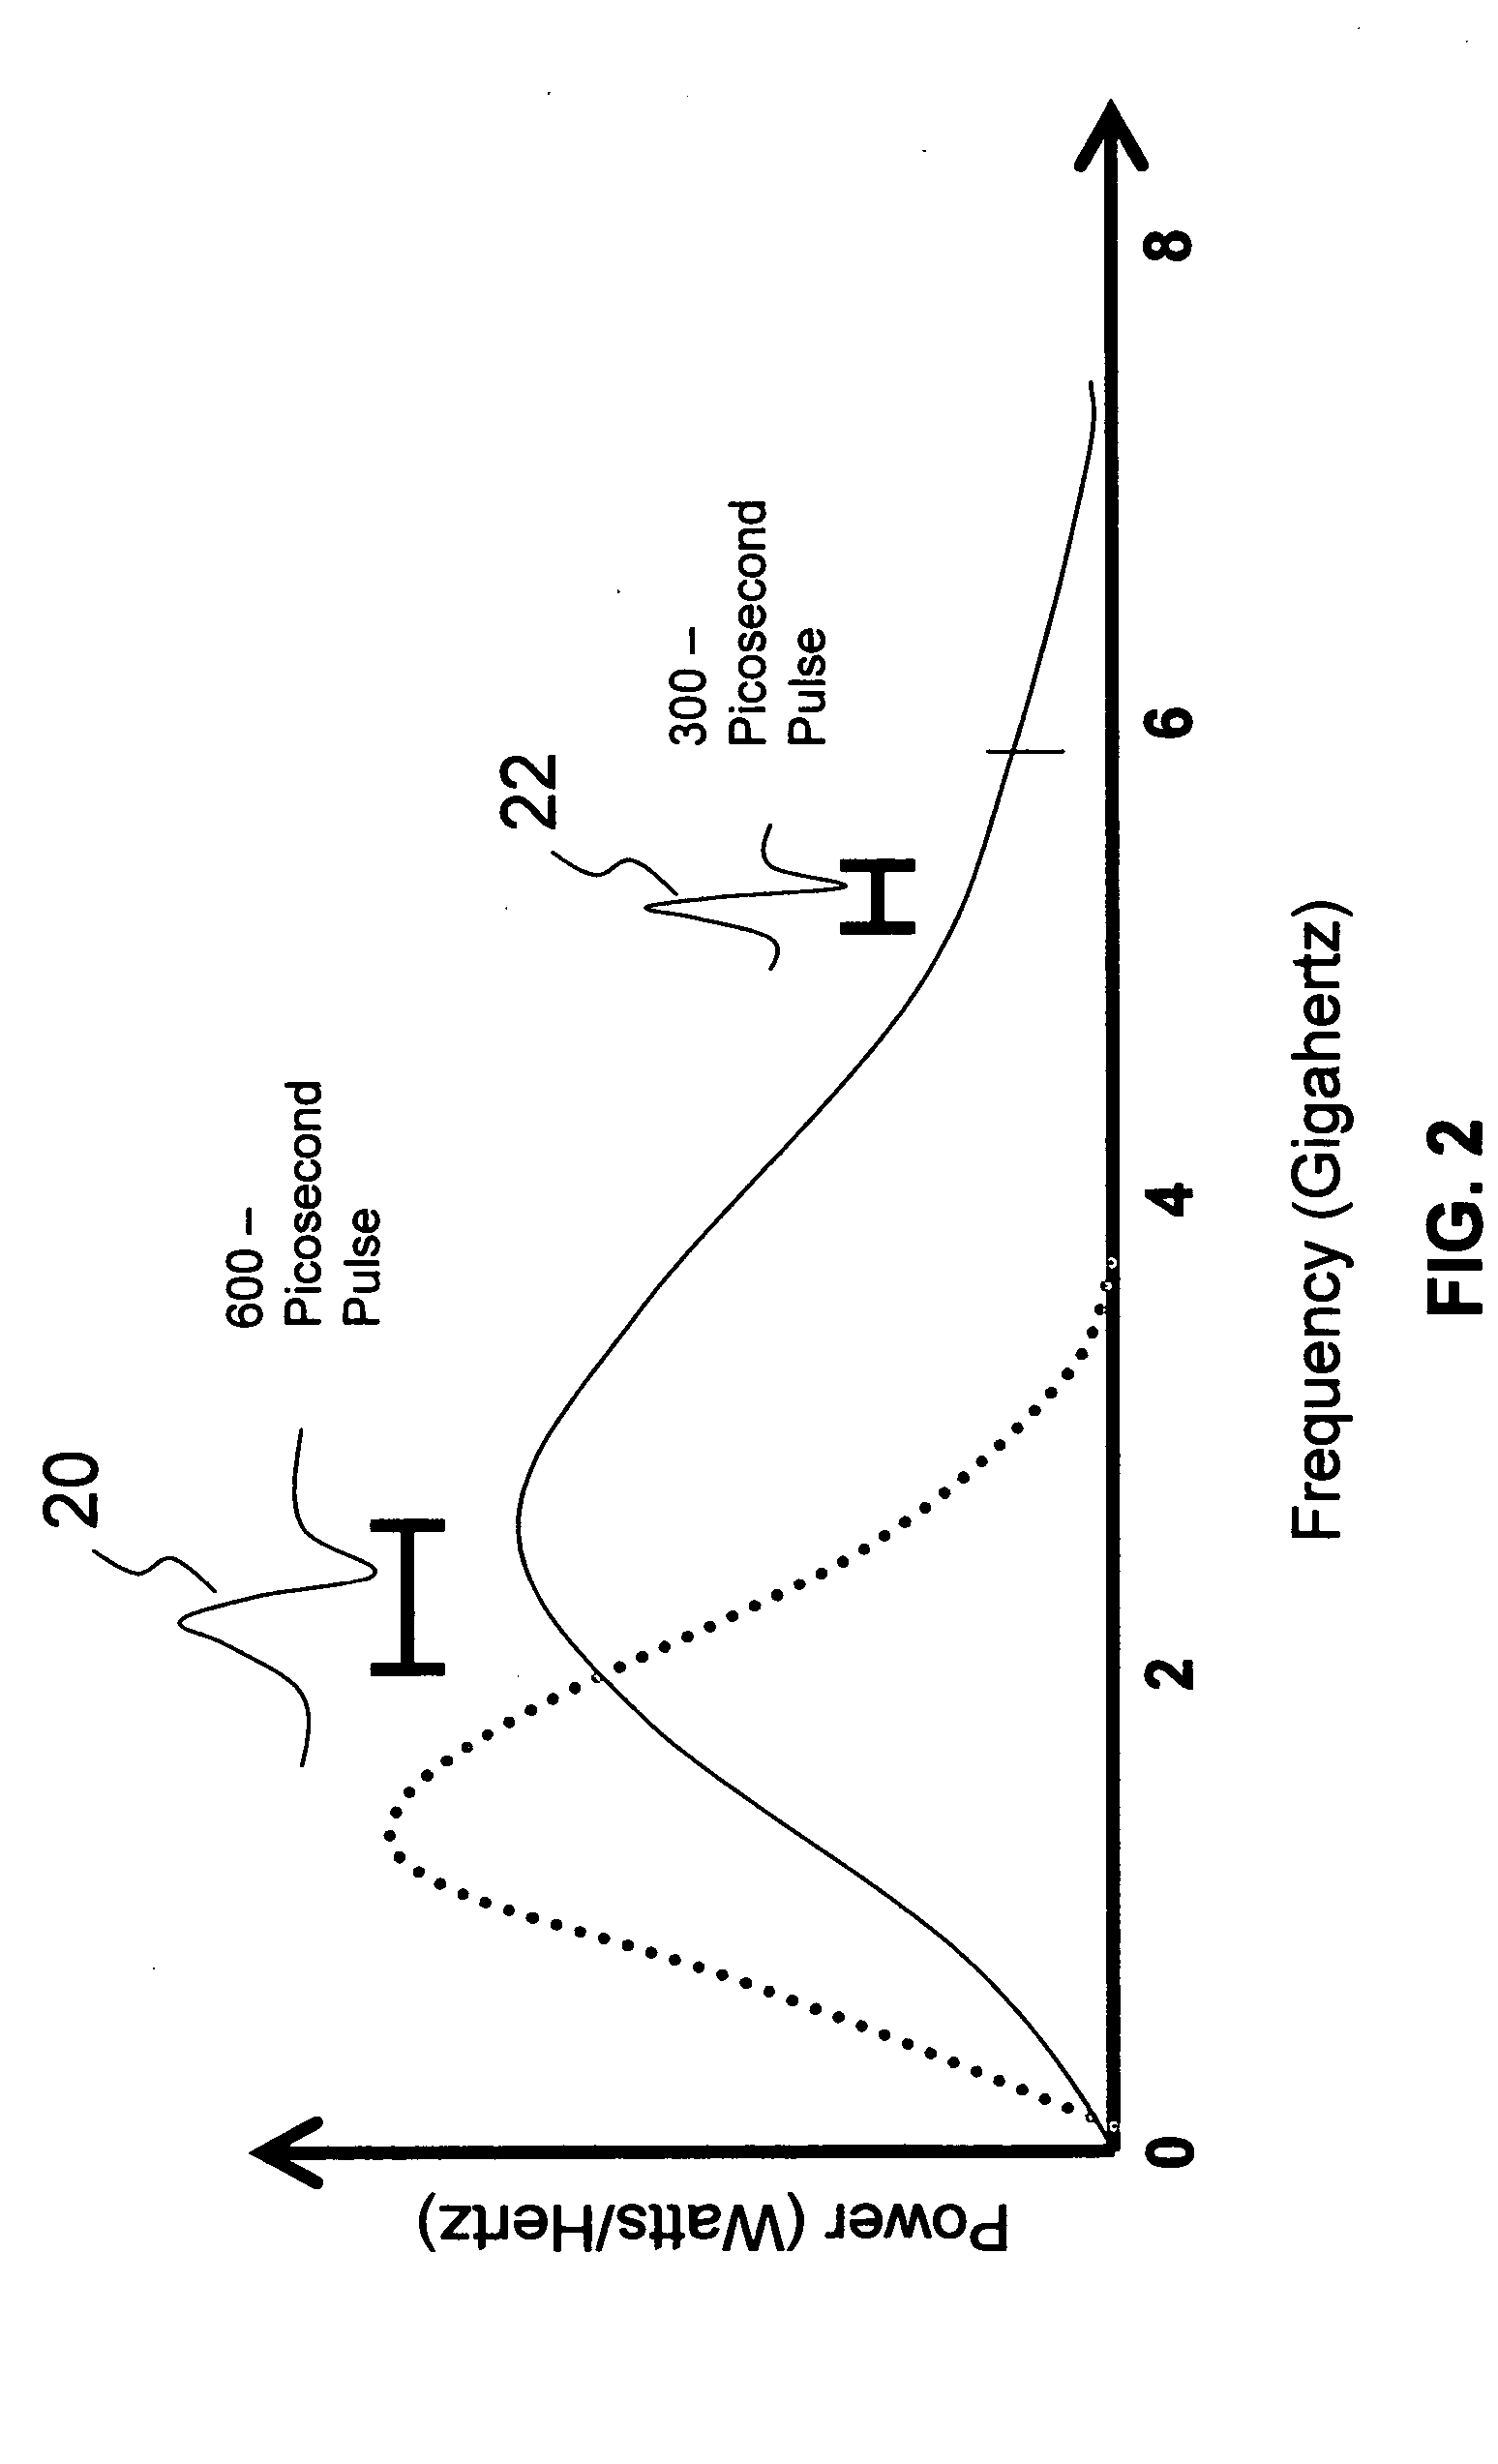 Systems and methods for operational, systems or integrity management of natural gas pipeline infrastructures